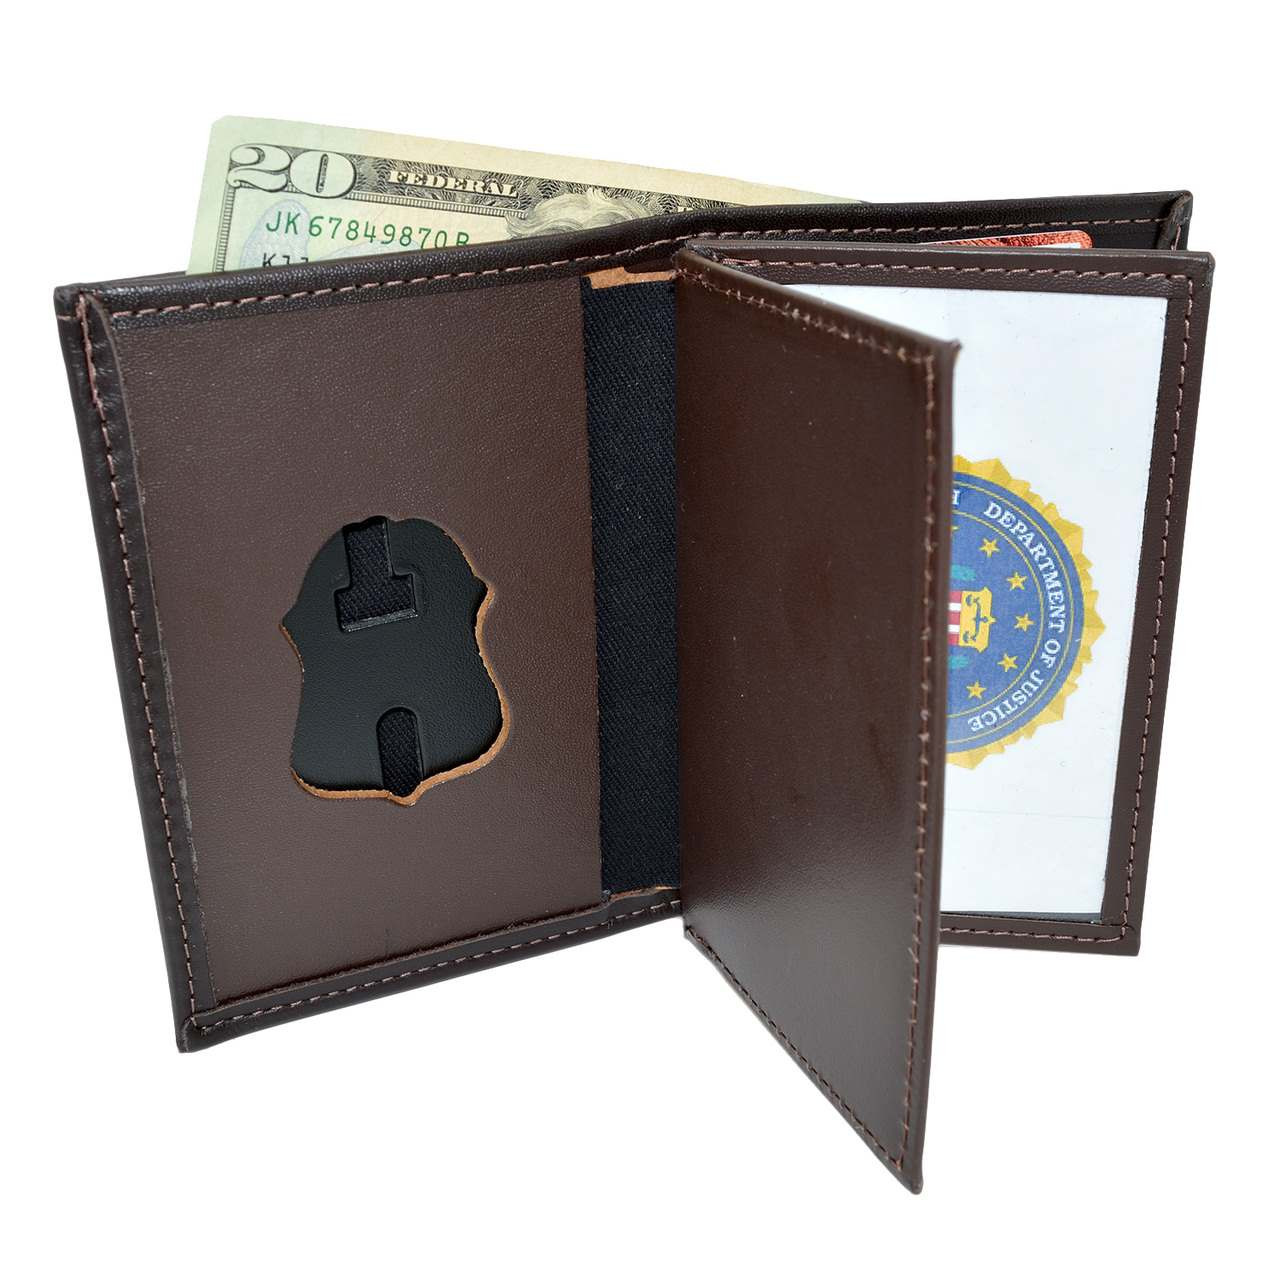 Perfect Fit FBI Medallion Double ID Credential Case Credit Card Wallet